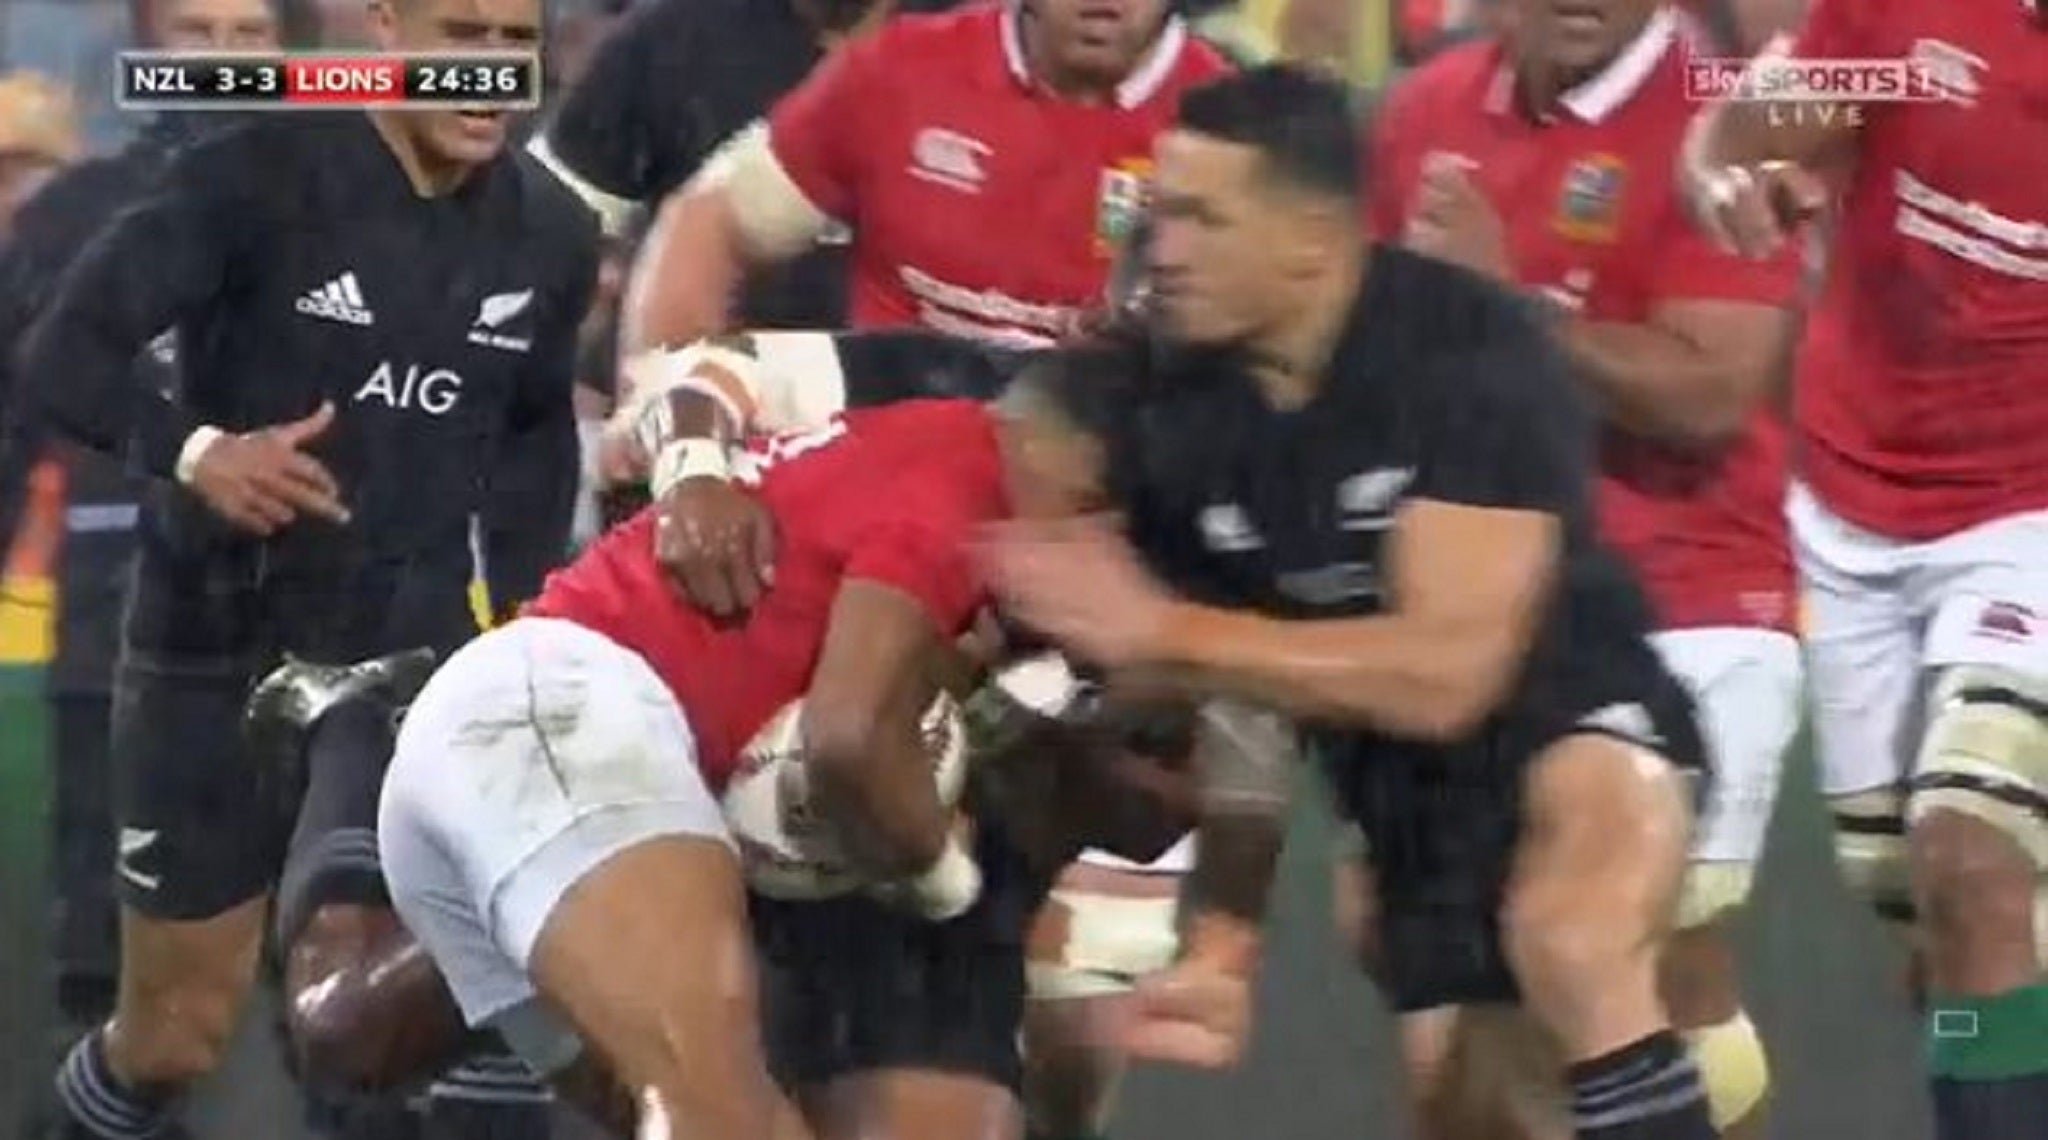 Williams leads with his shoulder as he smashes into Watson's face